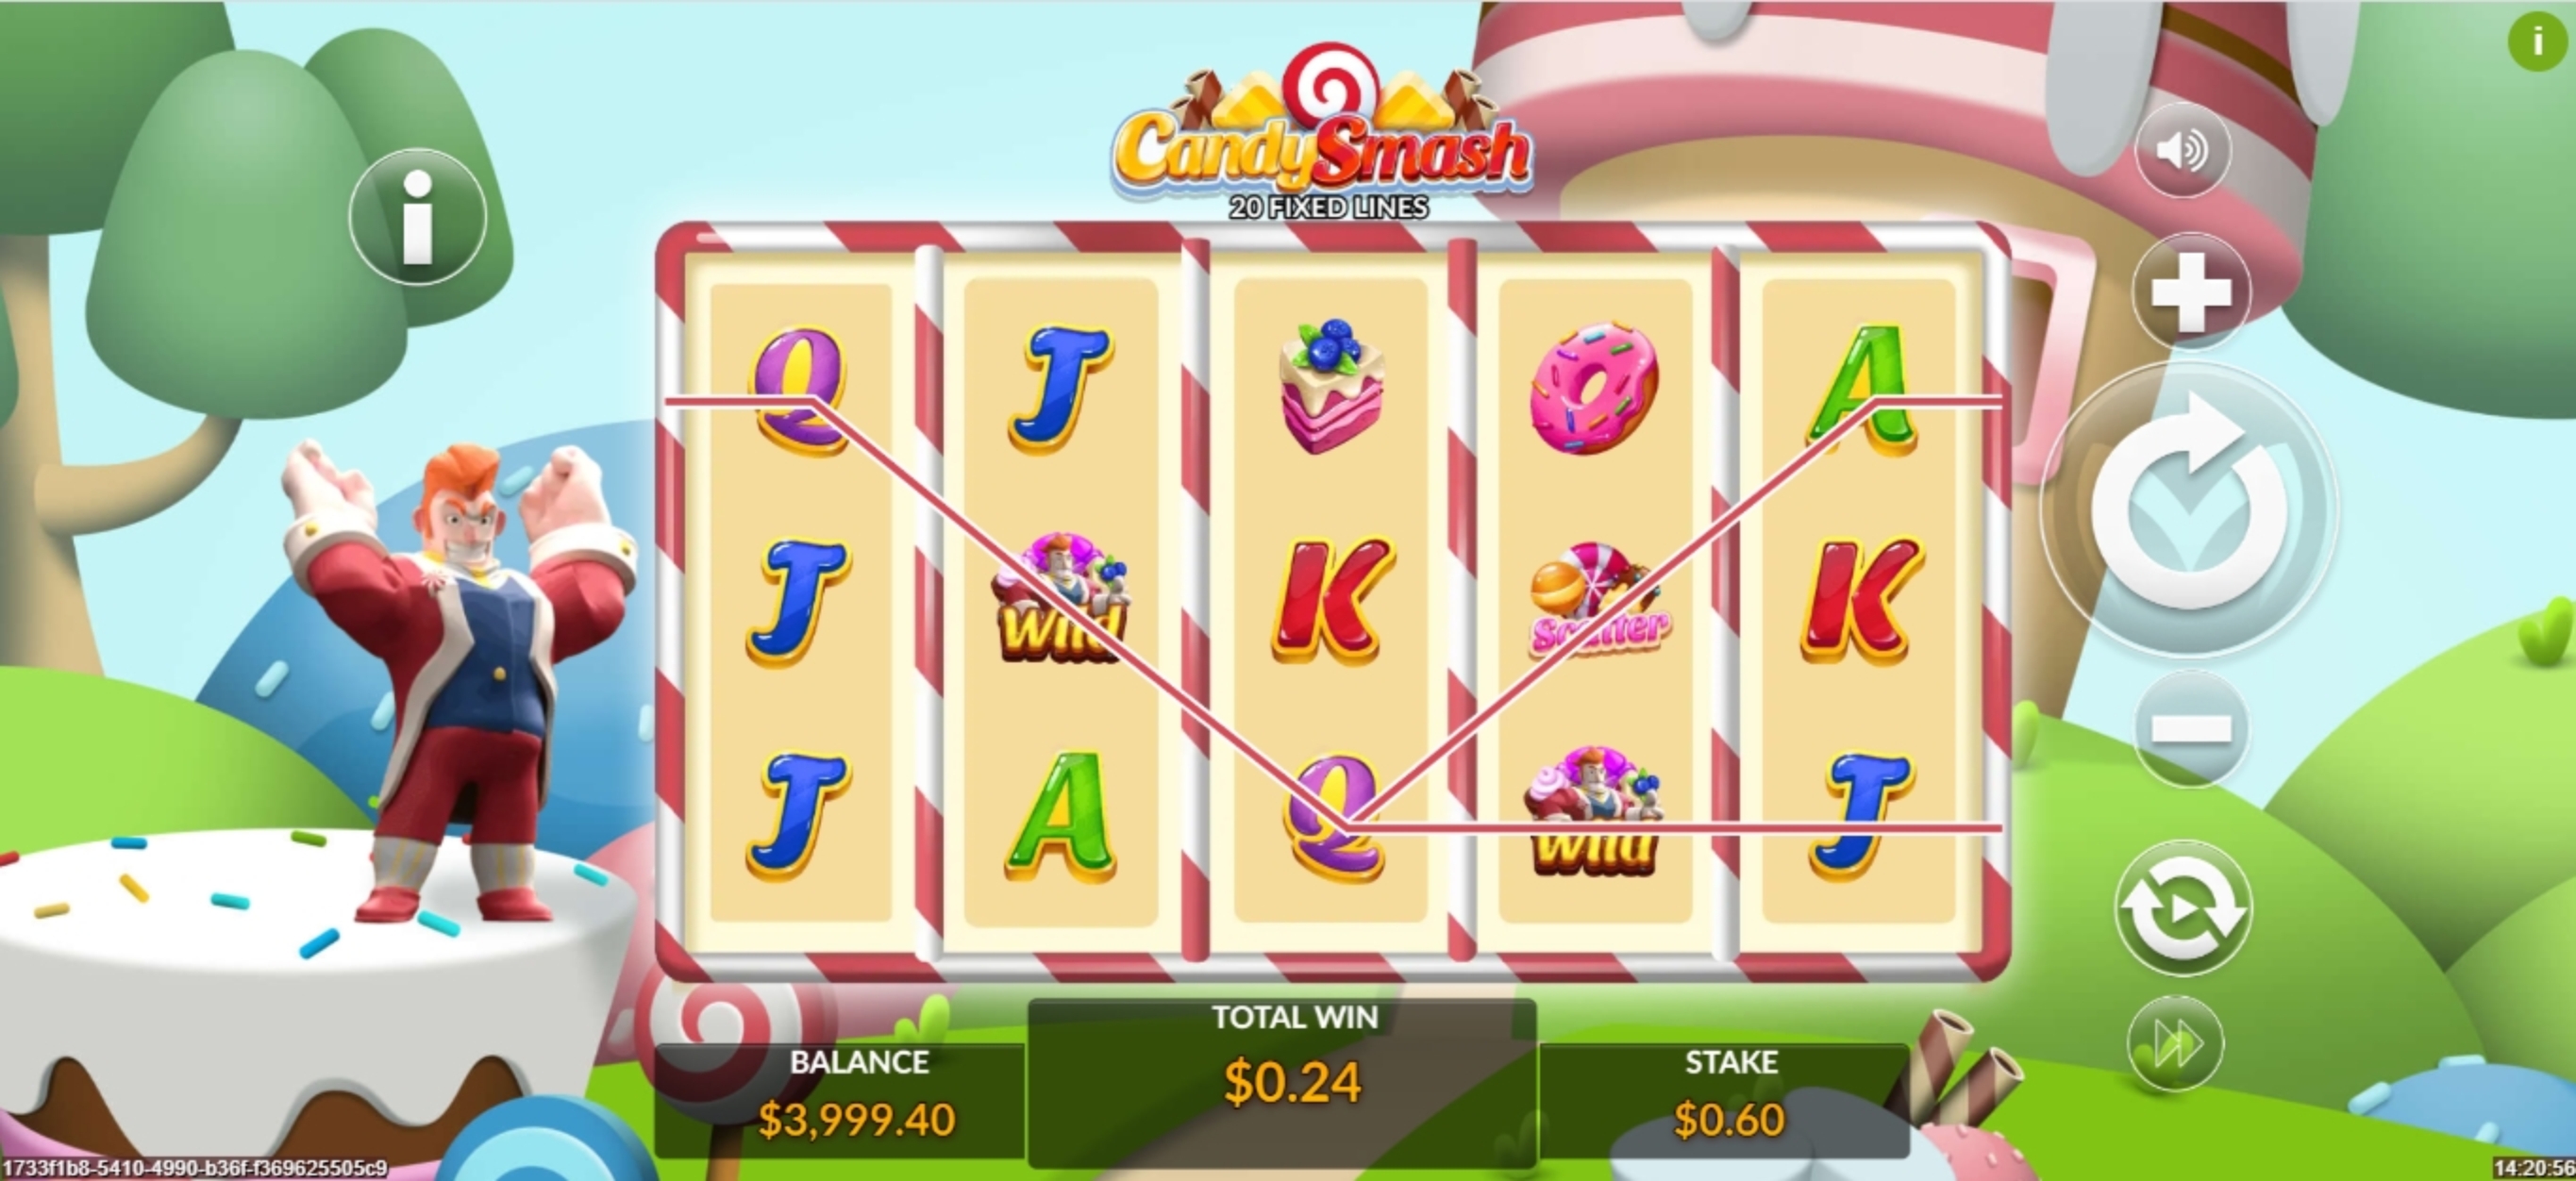 Win Money in Candy Smash Free Slot Game by Maverick